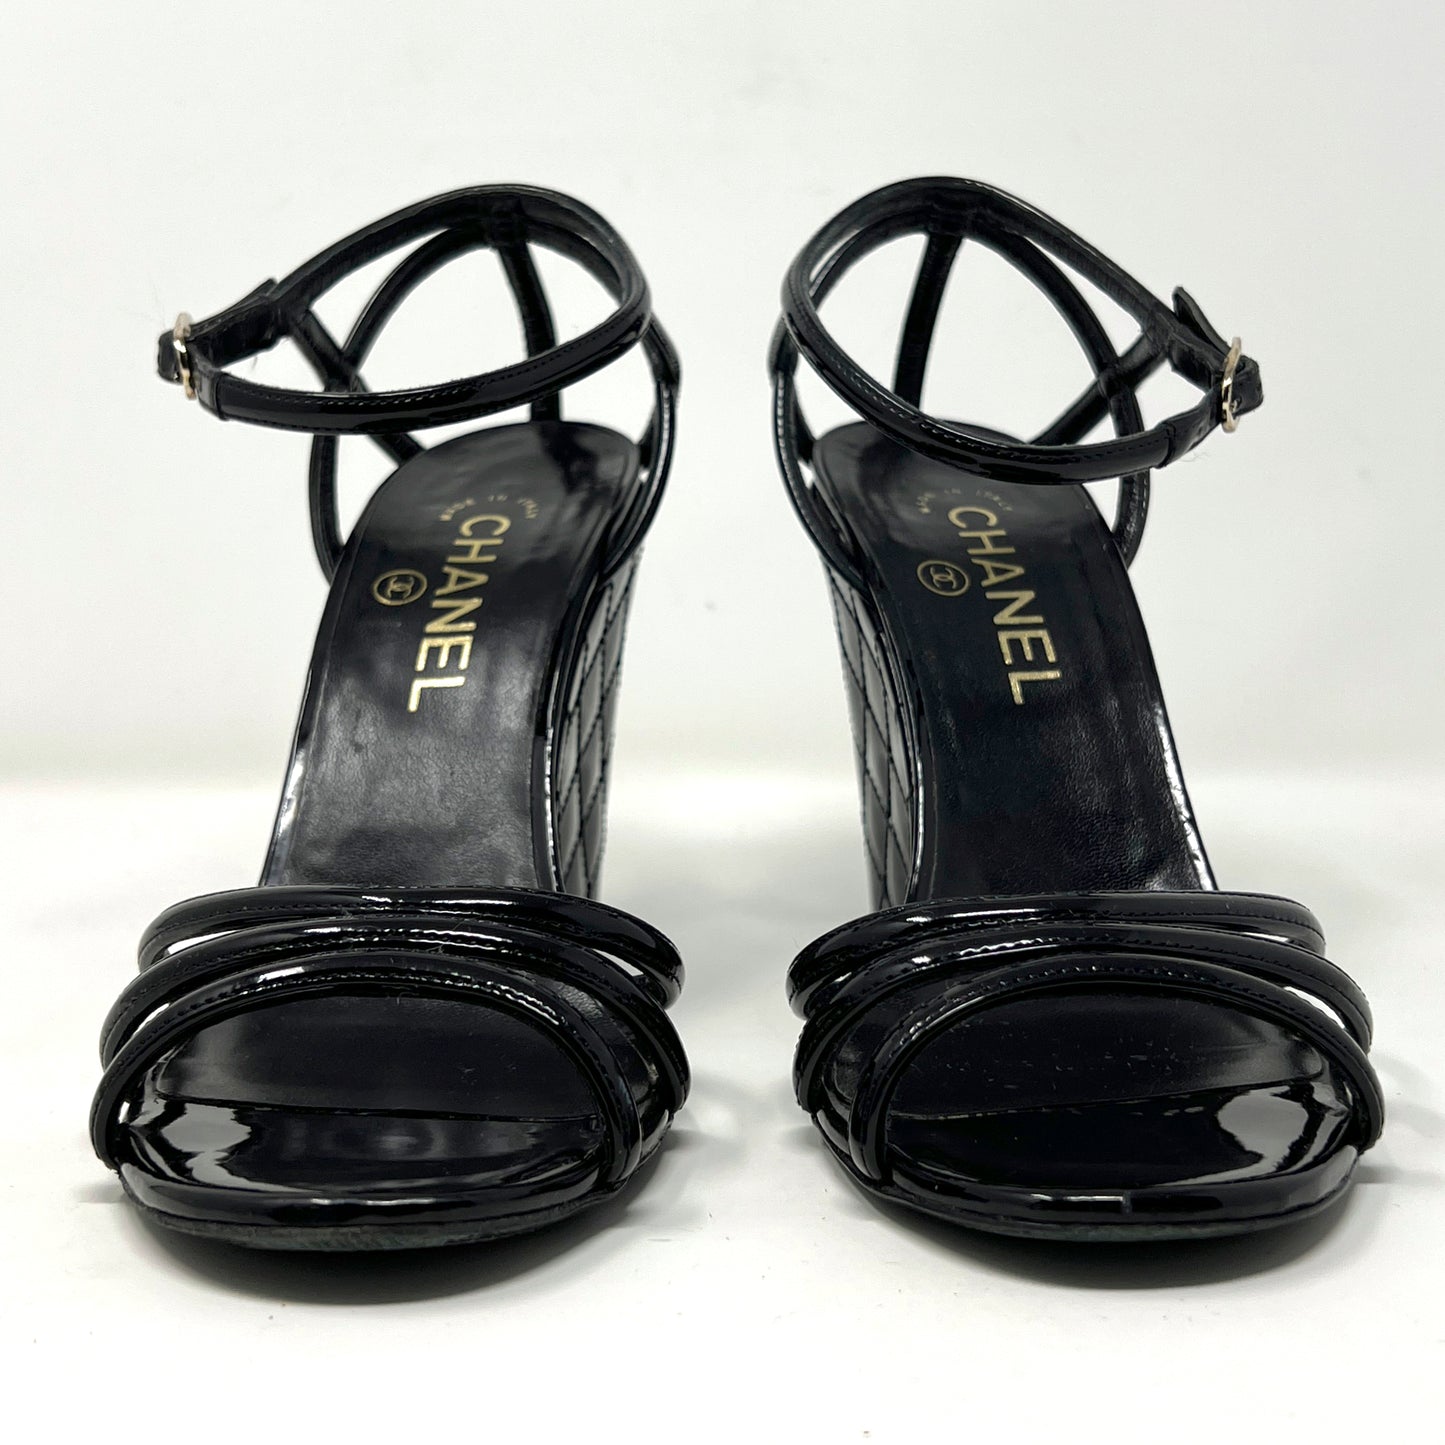 Chanel Black Patent Leather Quilted Matelasse Strappy Wedge Caged Heel Sandals Size EU 38